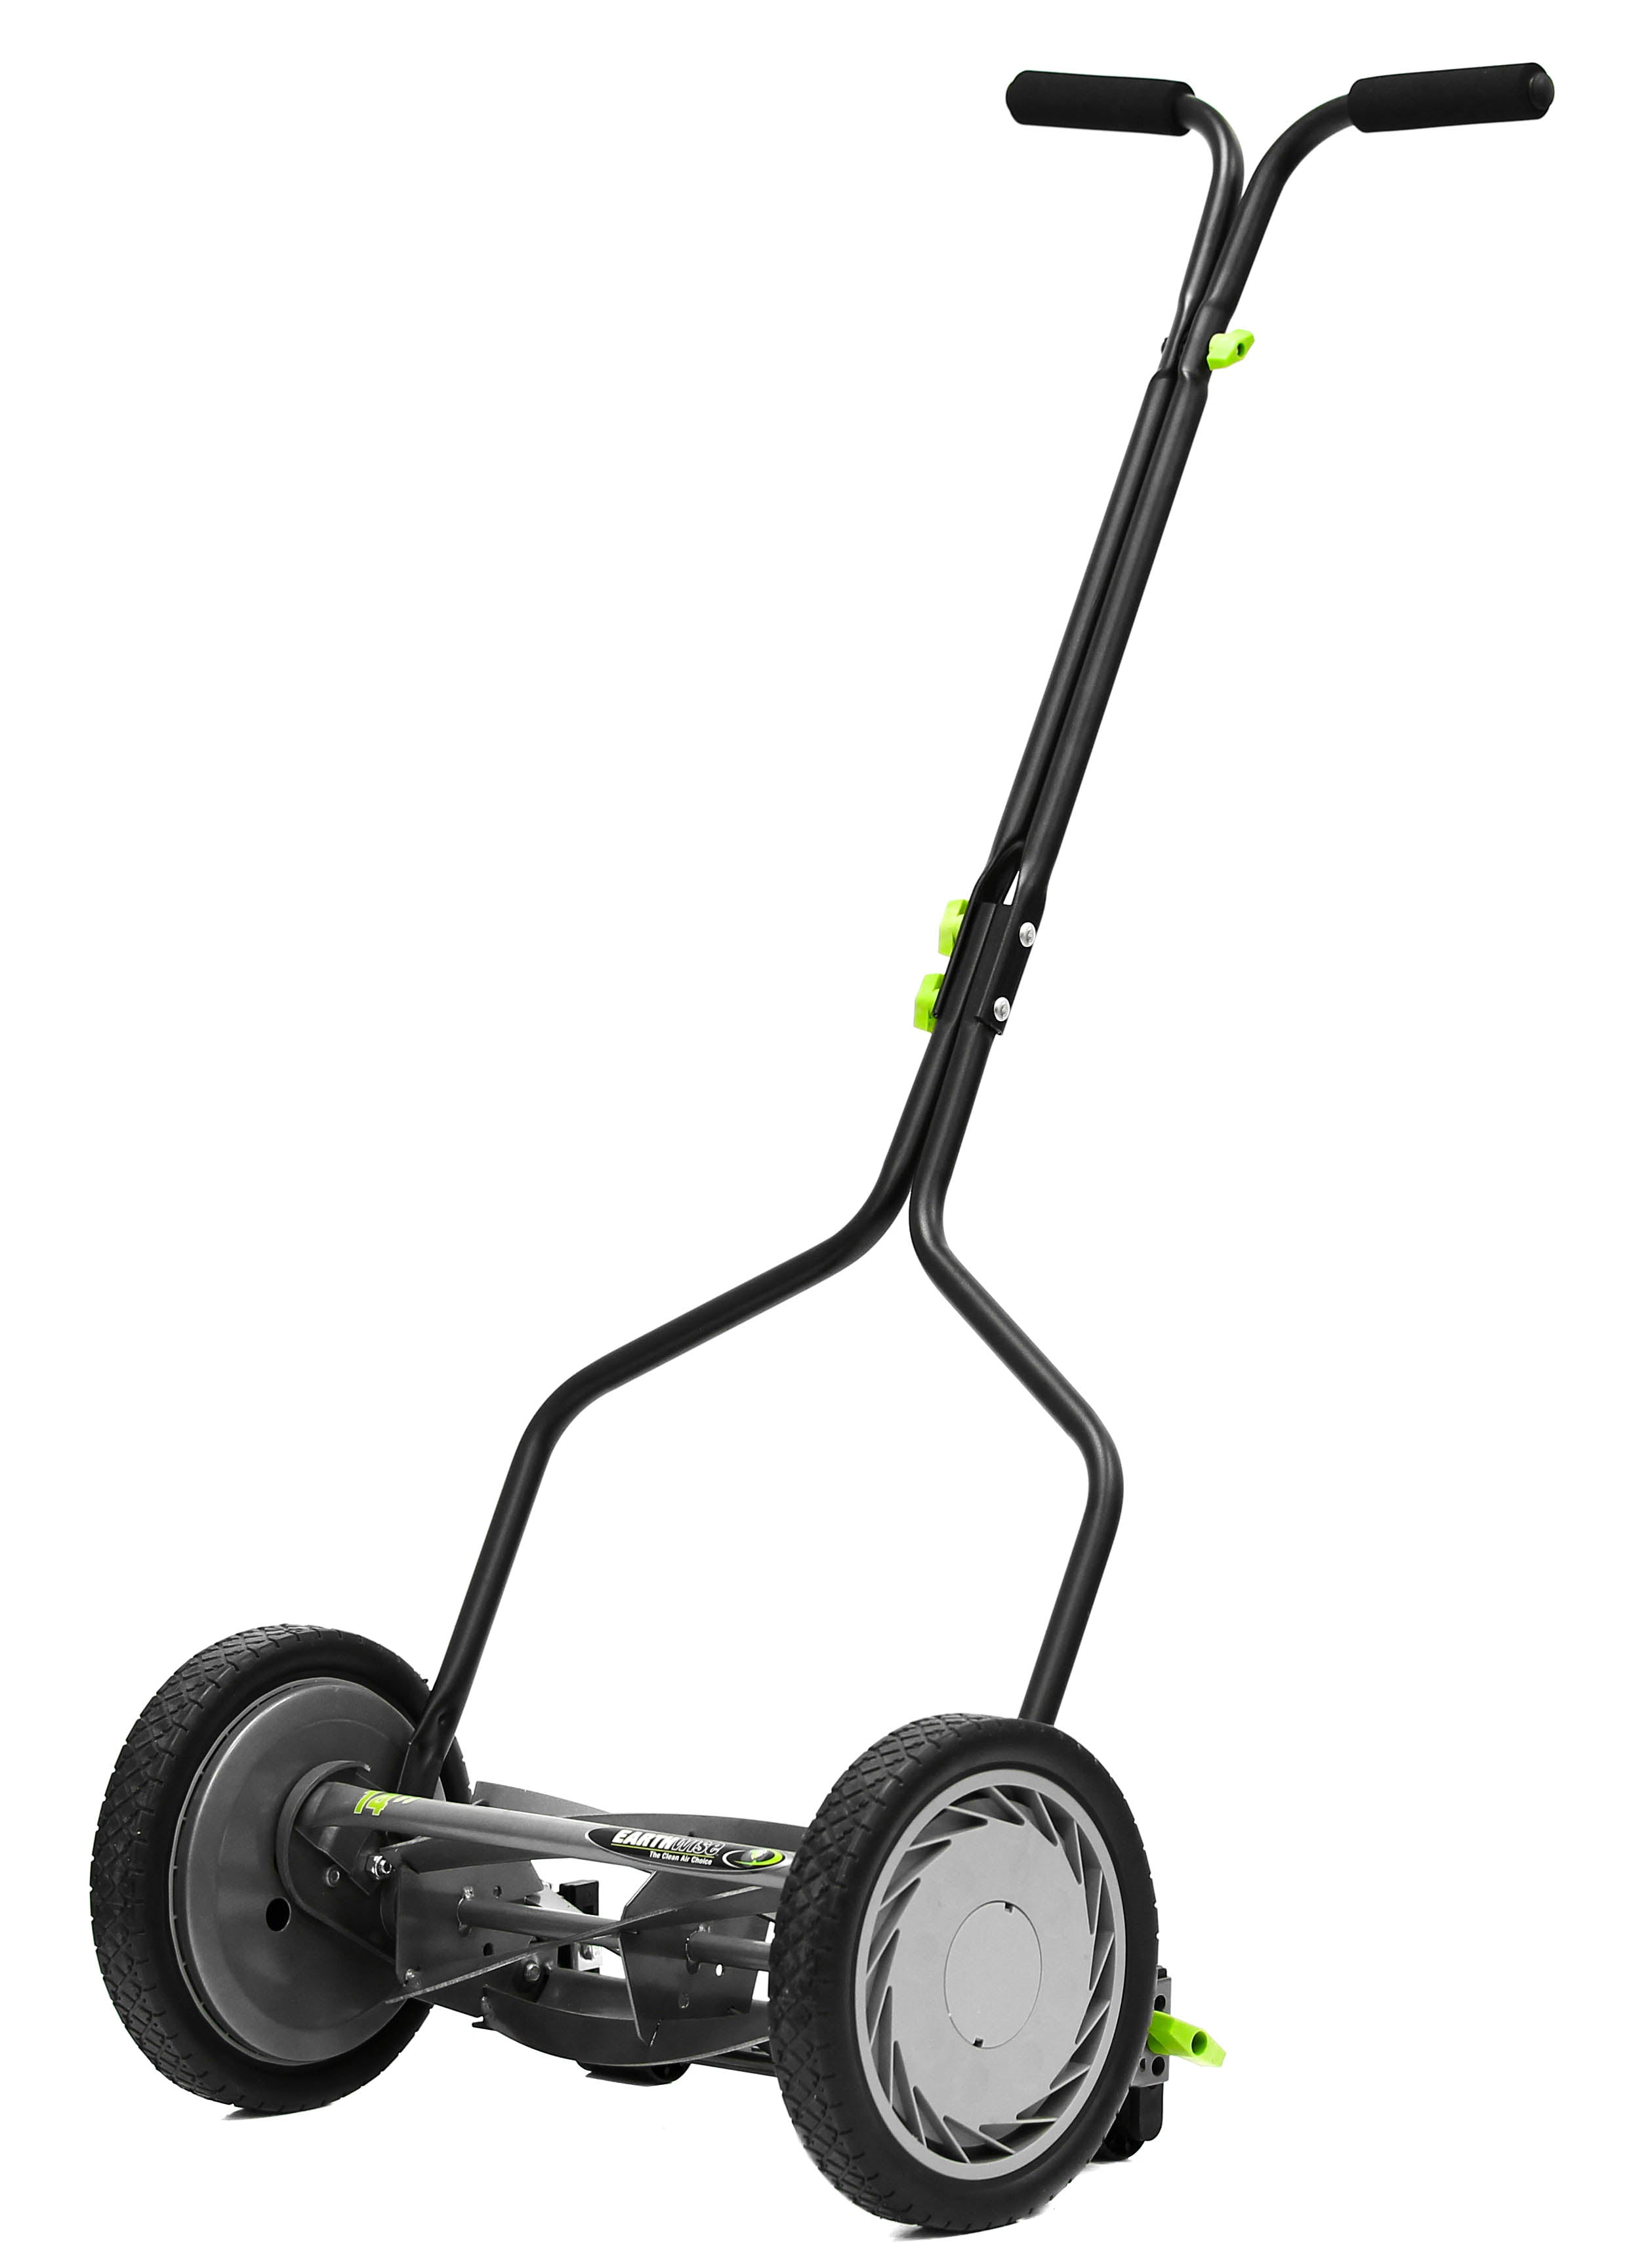 Earthwise Power Tools by ALM 18 Manual Reel Mower with Trailing